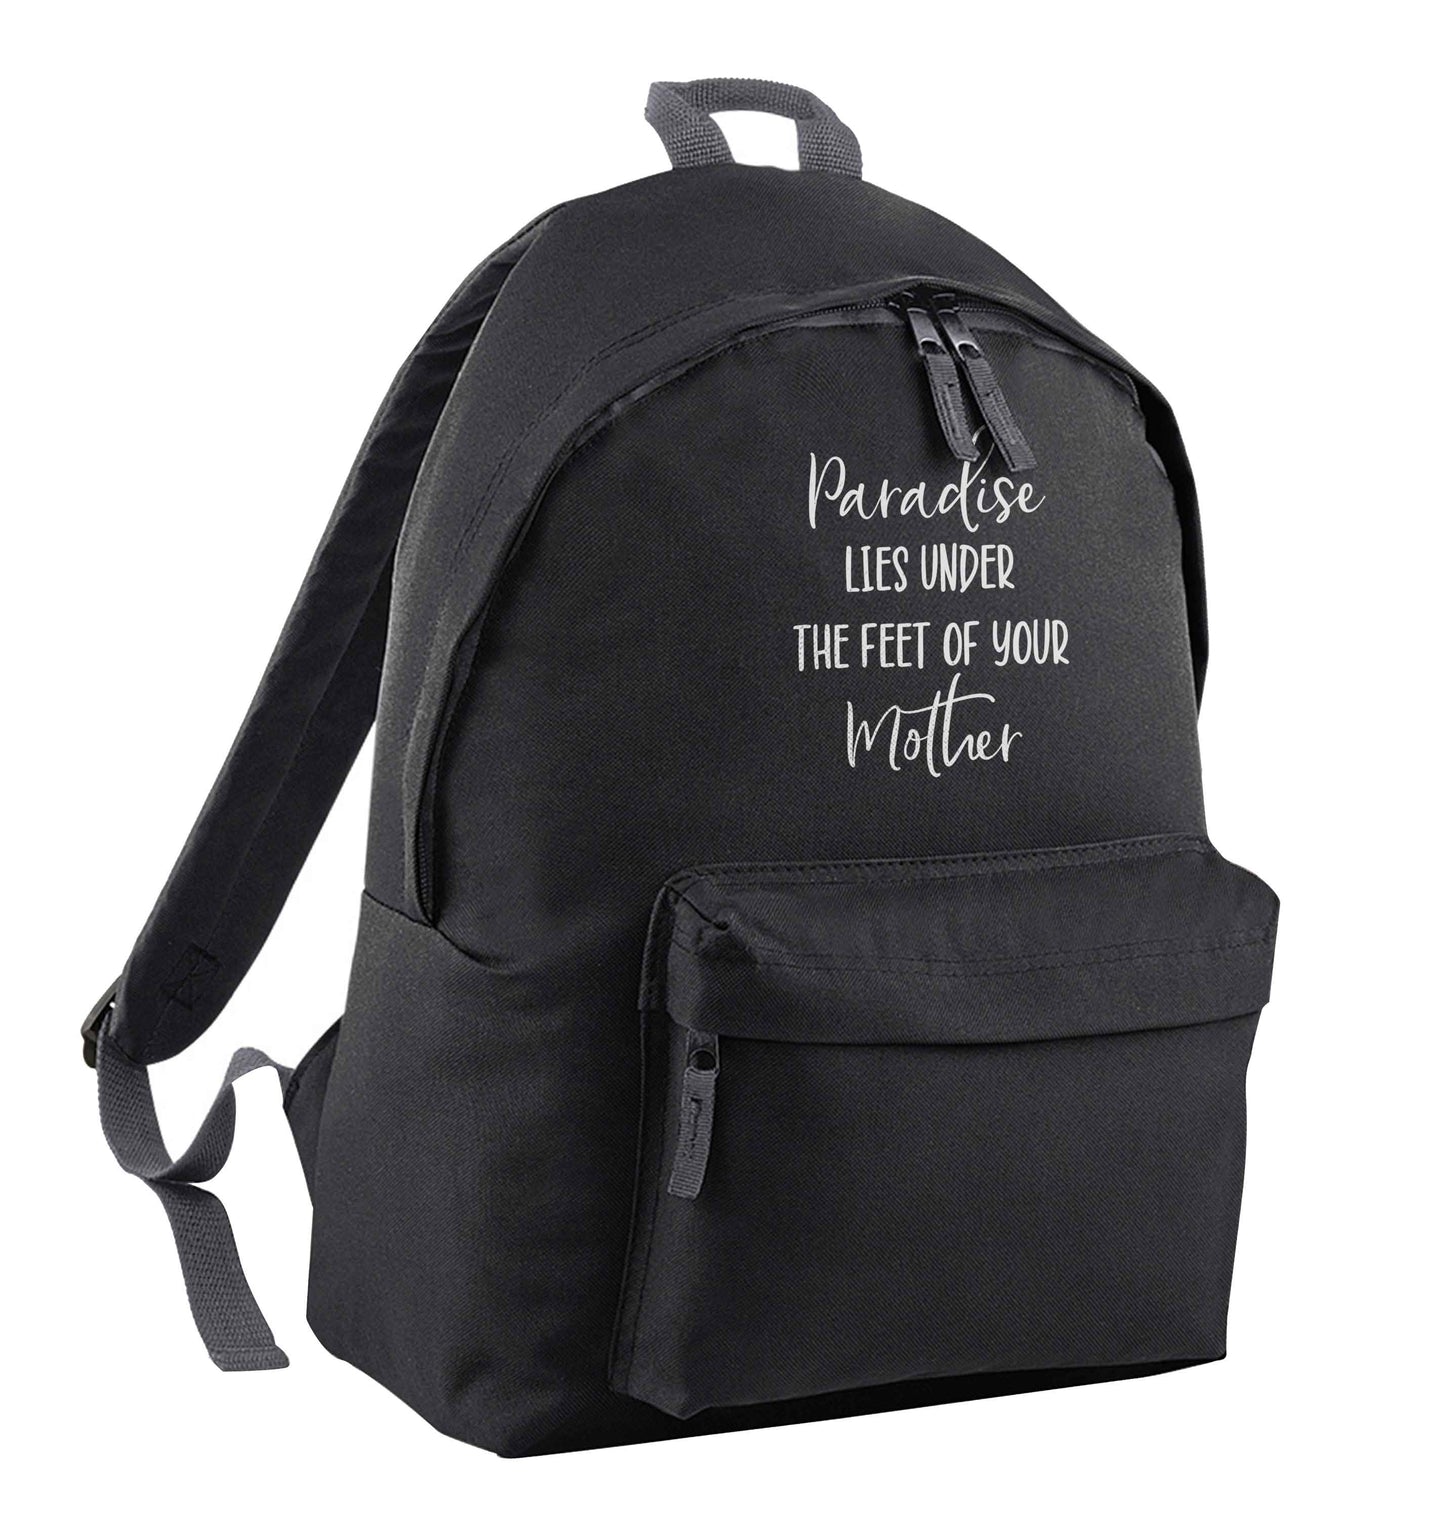 Paradise lies under the feet of your mother black children's backpack